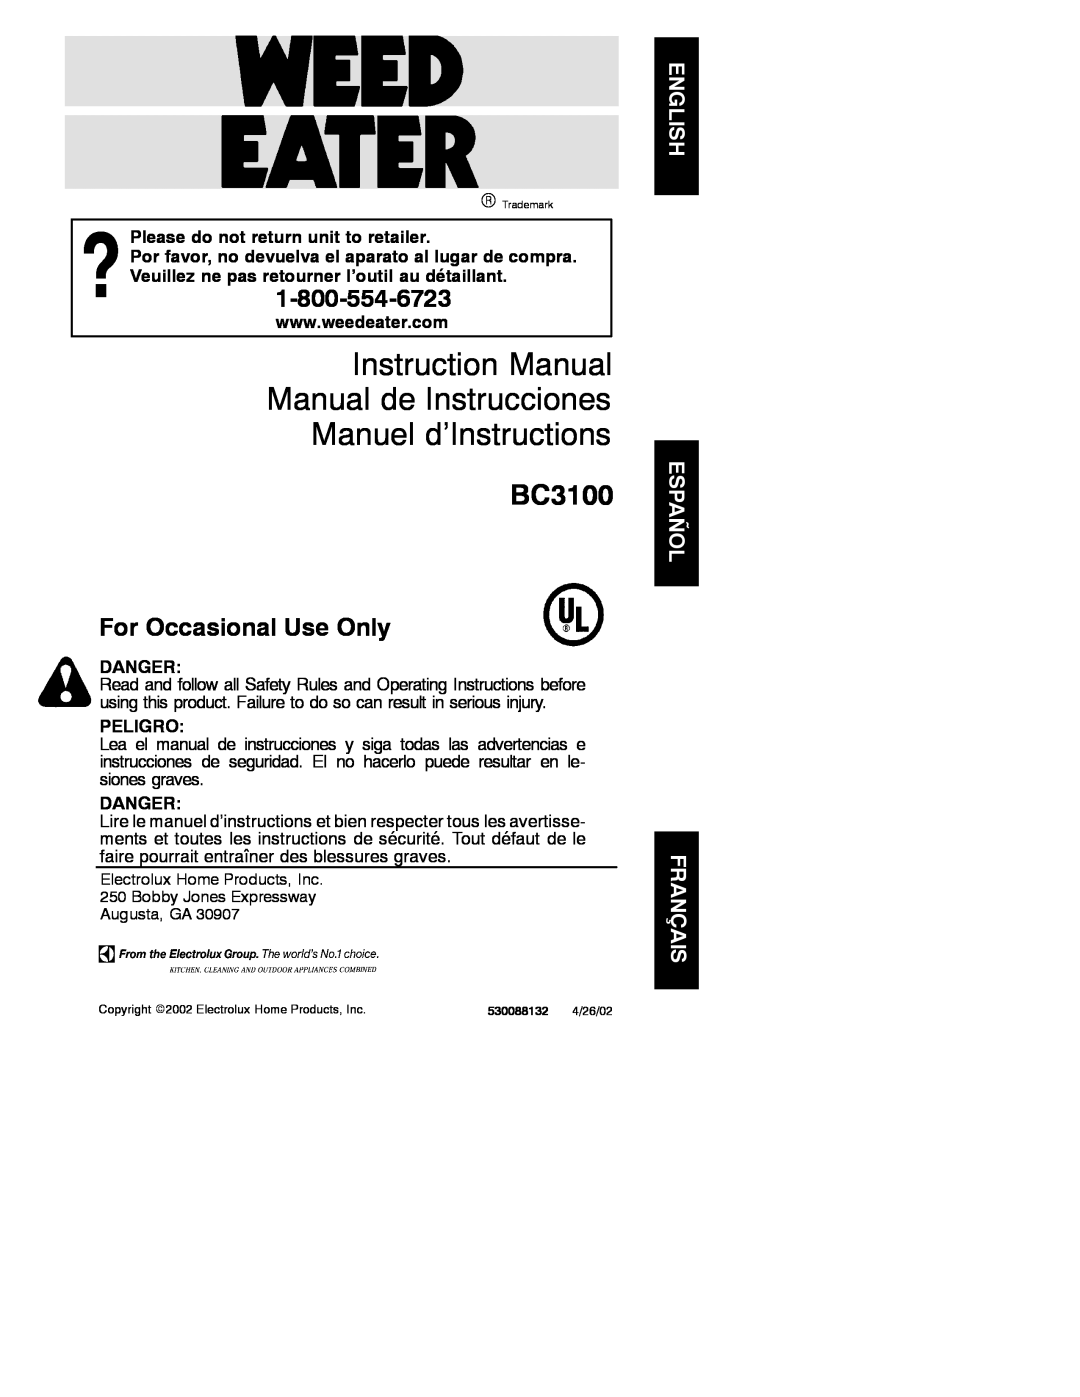 Weed Eater 530088132 instruction manual Manuel d’Instructions, BC3100, For Occasional Use Only, Danger, Peligro 